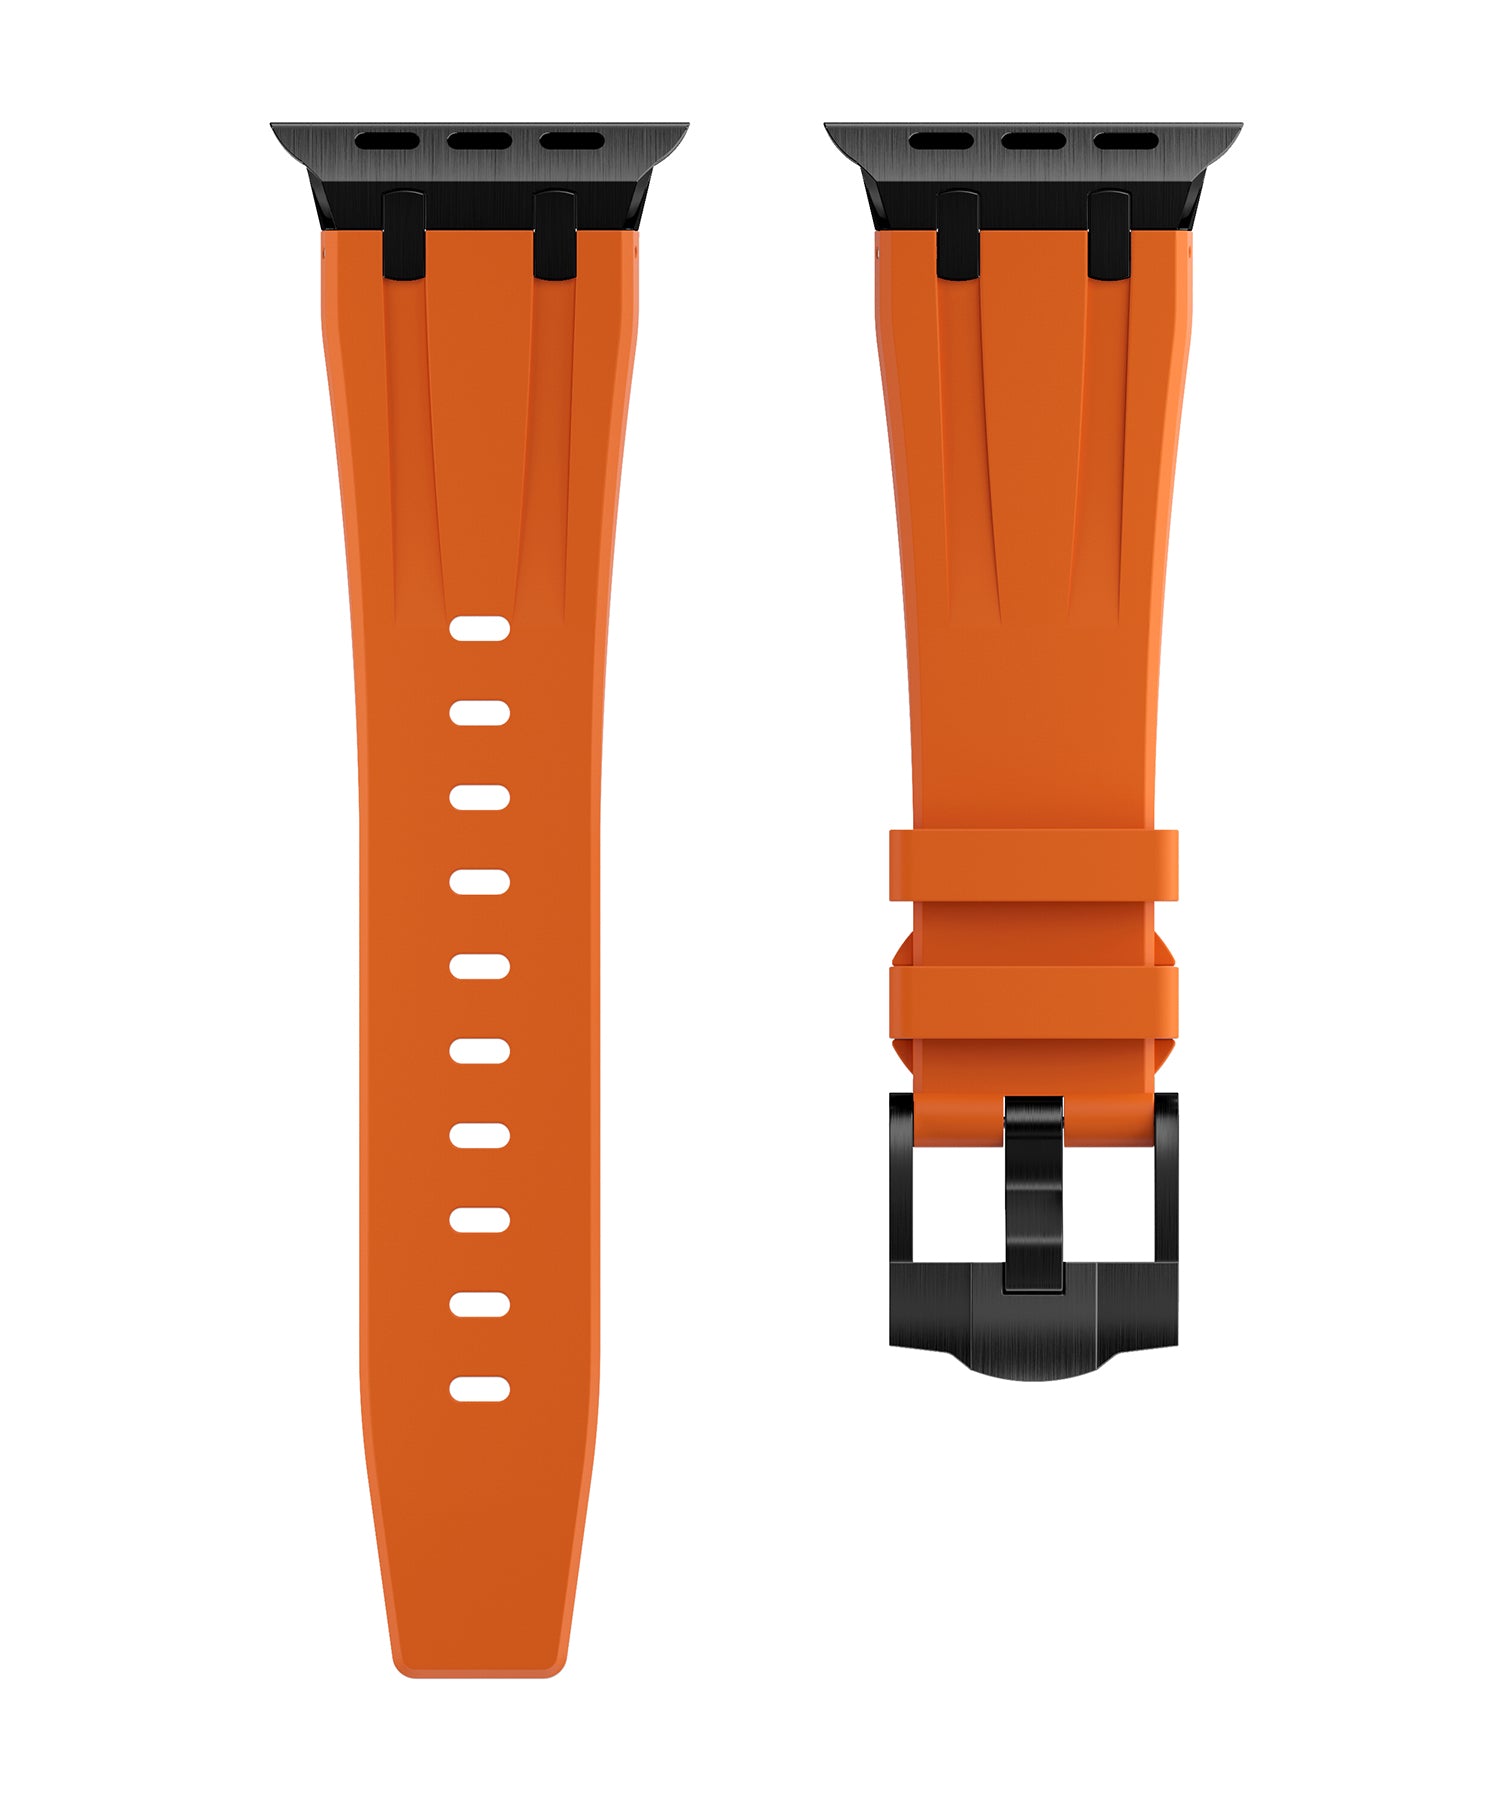 Premium Orange colour rubber with black stainless steel metal connectors and buckles for Apple Watch Series 9 45mm and Ultra 2 49mm